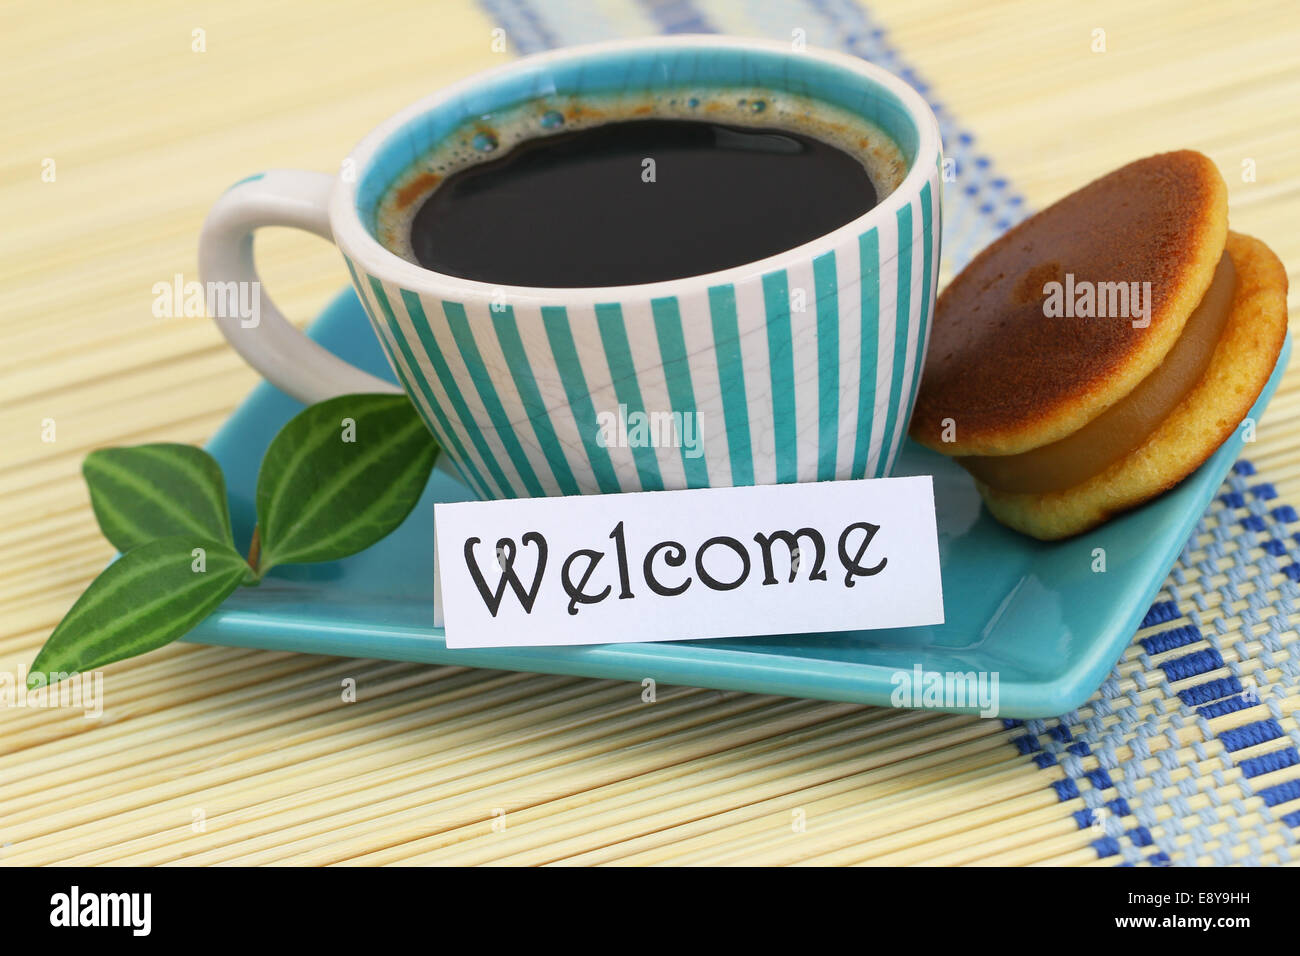 [Image: welcome-card-with-cup-of-coffee-and-cookie-E8Y9HH.jpg]